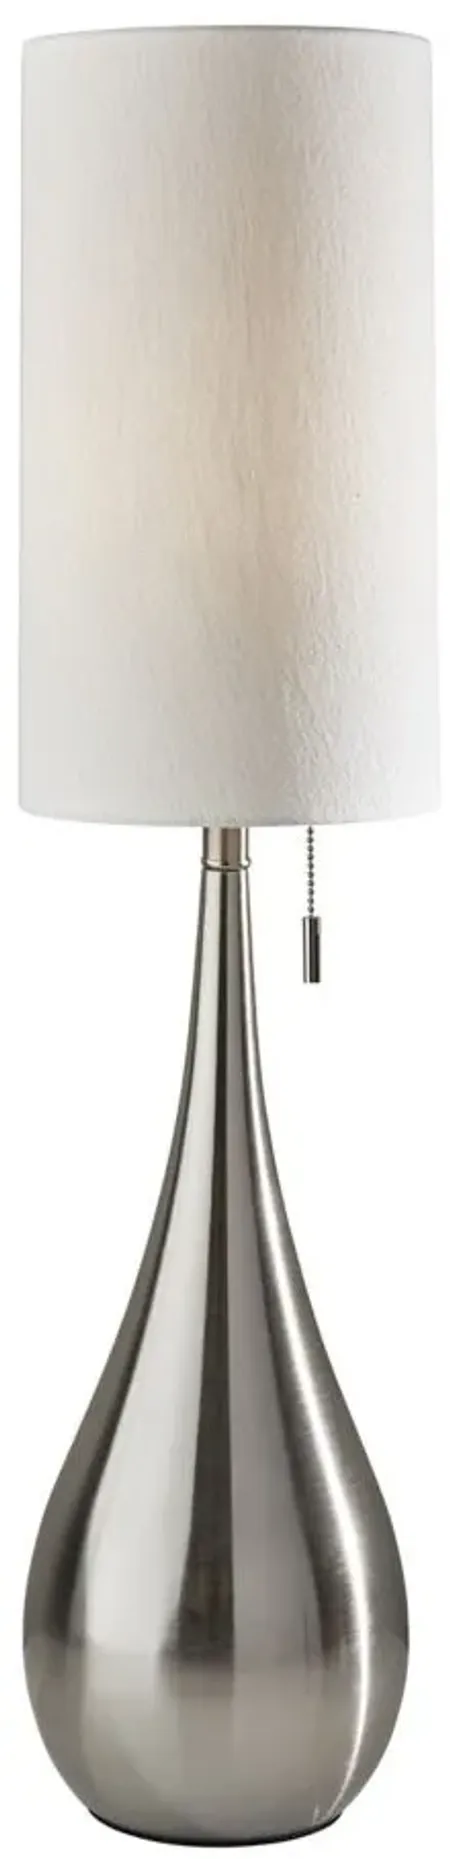 Christina Table Lamp in Brushed Steel by Adesso Inc